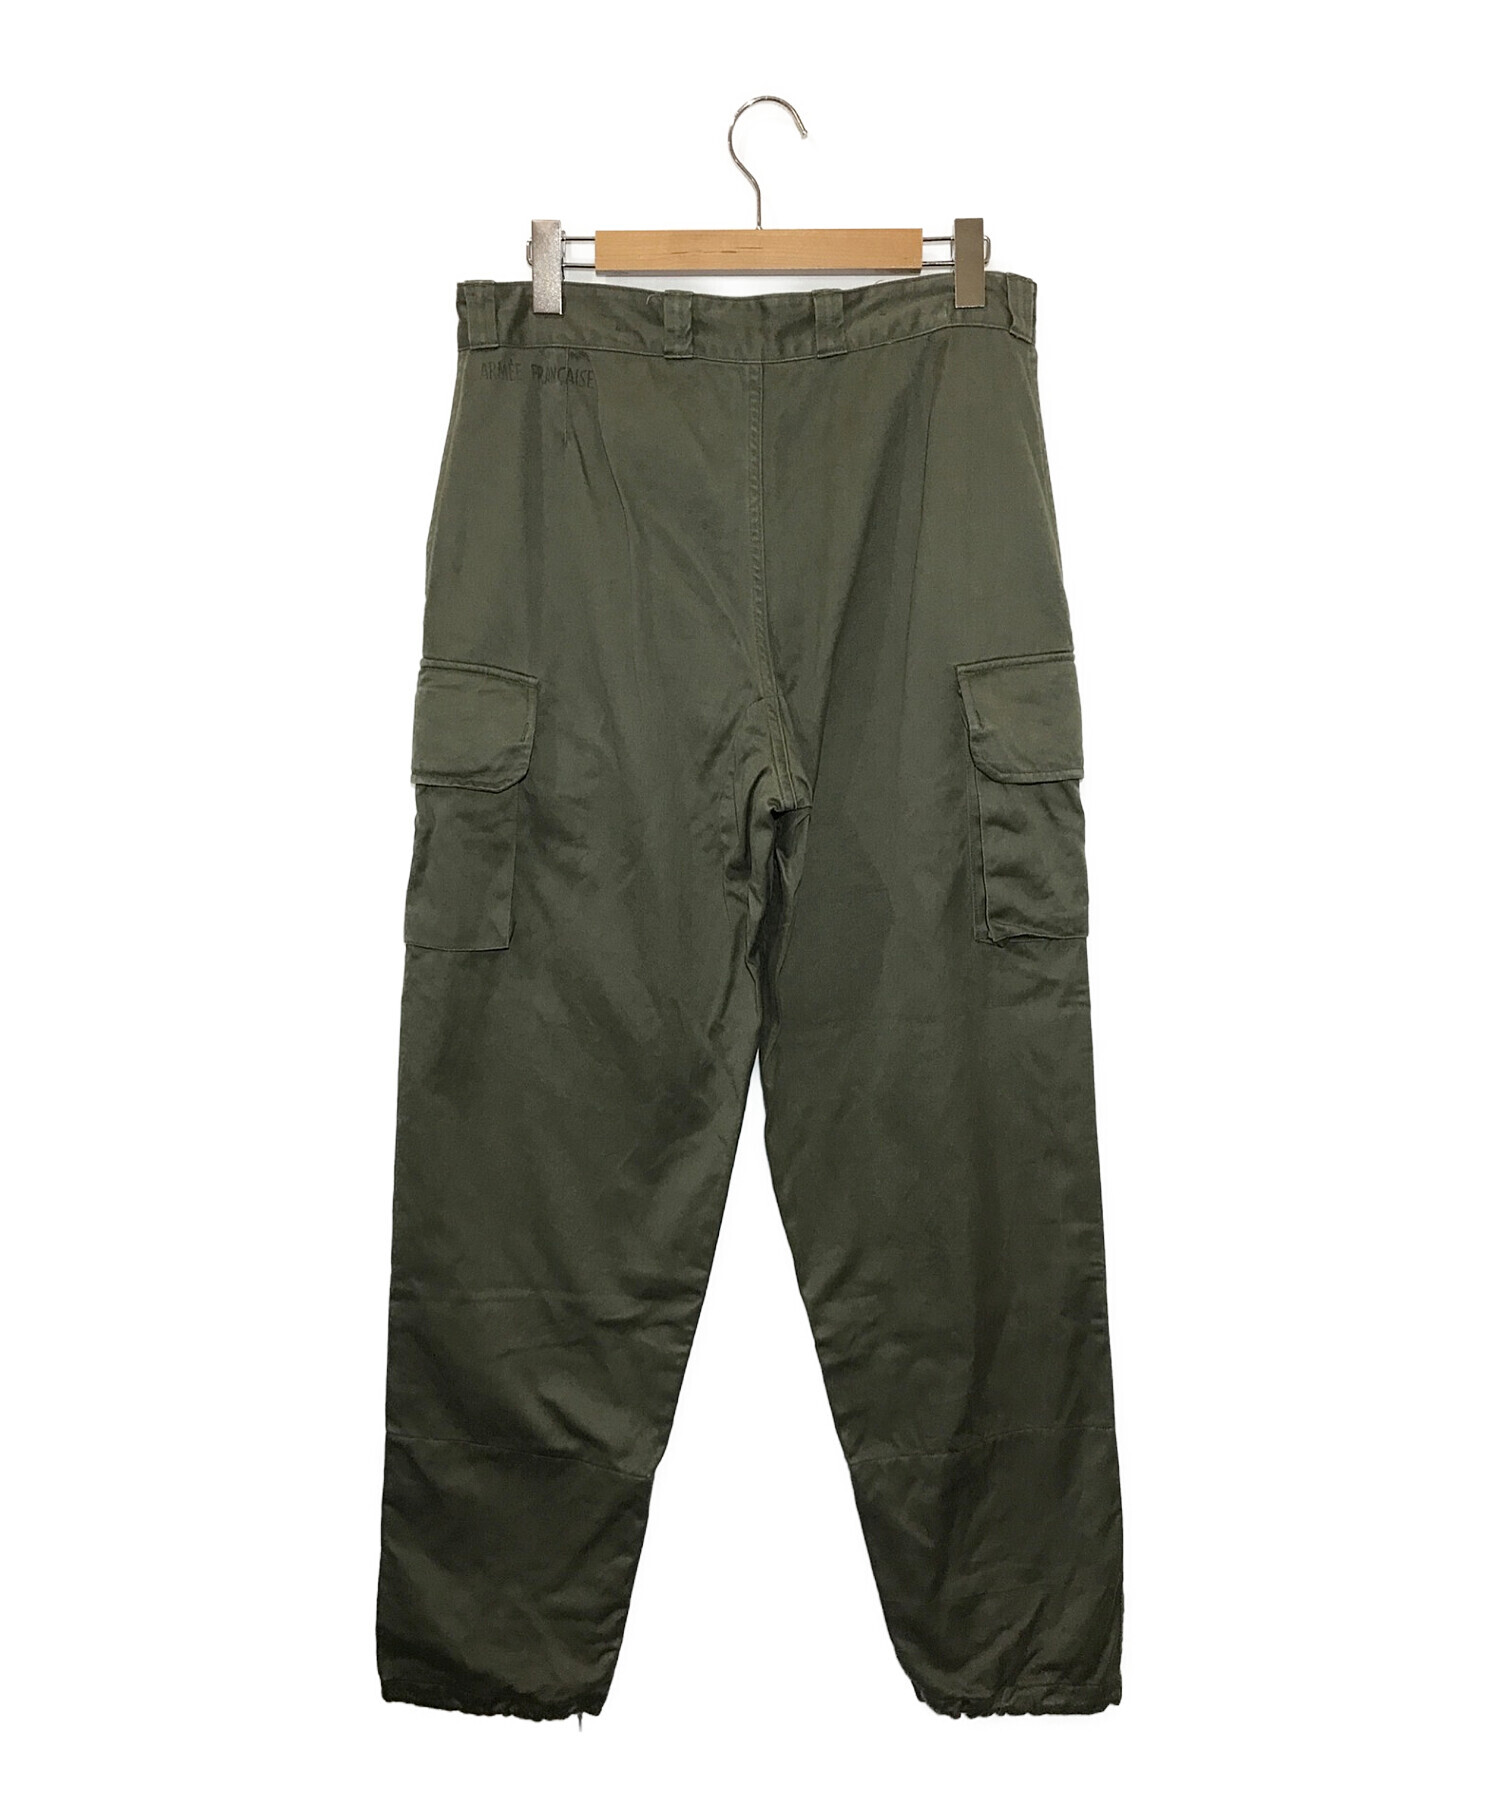 French Army (フランス軍) M-64 TROUSERS カーキ サイズ:84M